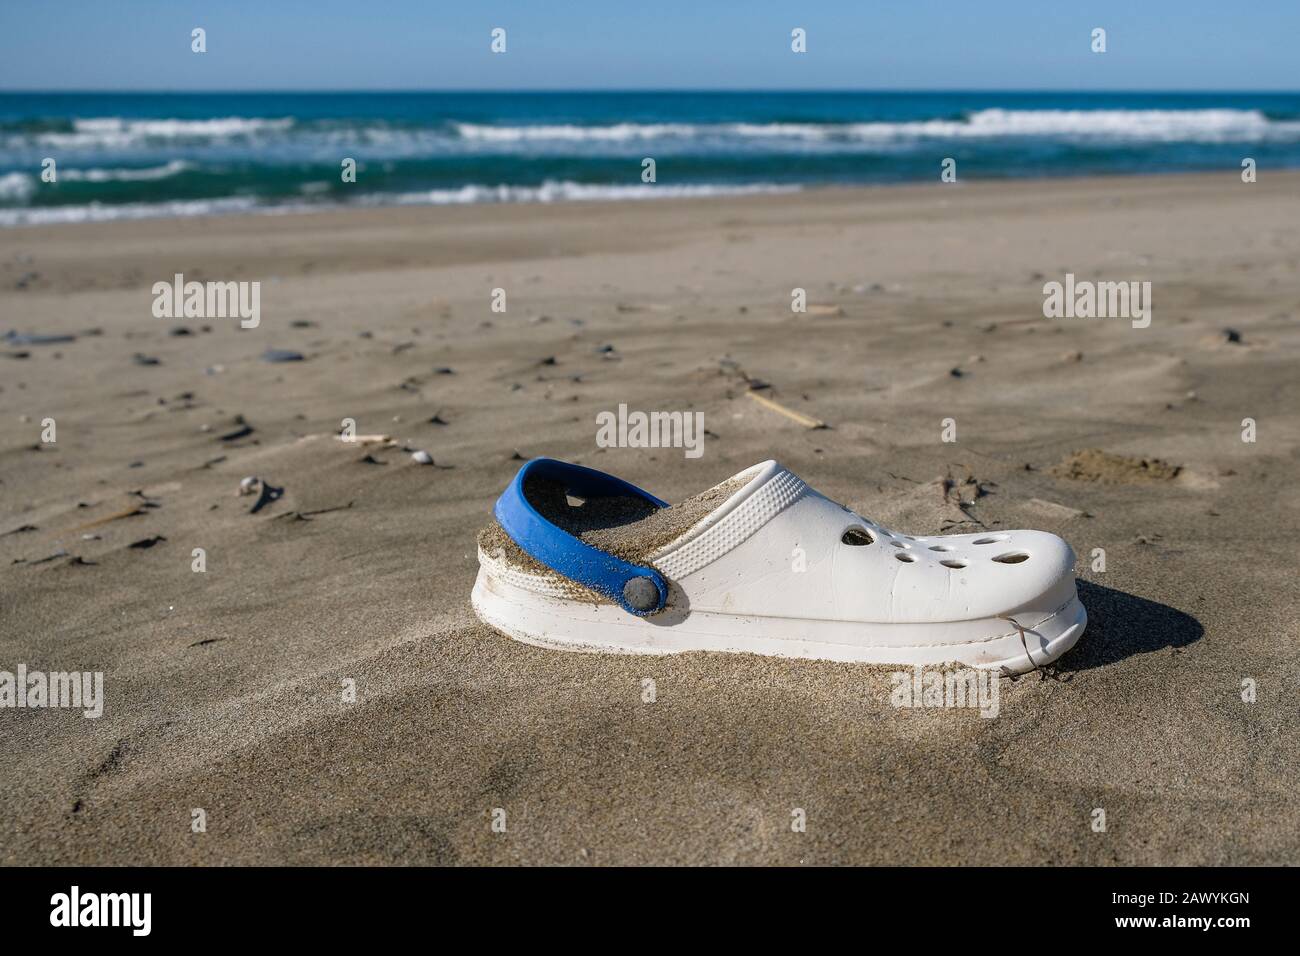 Palinuro,italy - february 10 2020: Summer slippers trash on wild polluted sea coast ecosystem after sea storm,italy Stock Photo